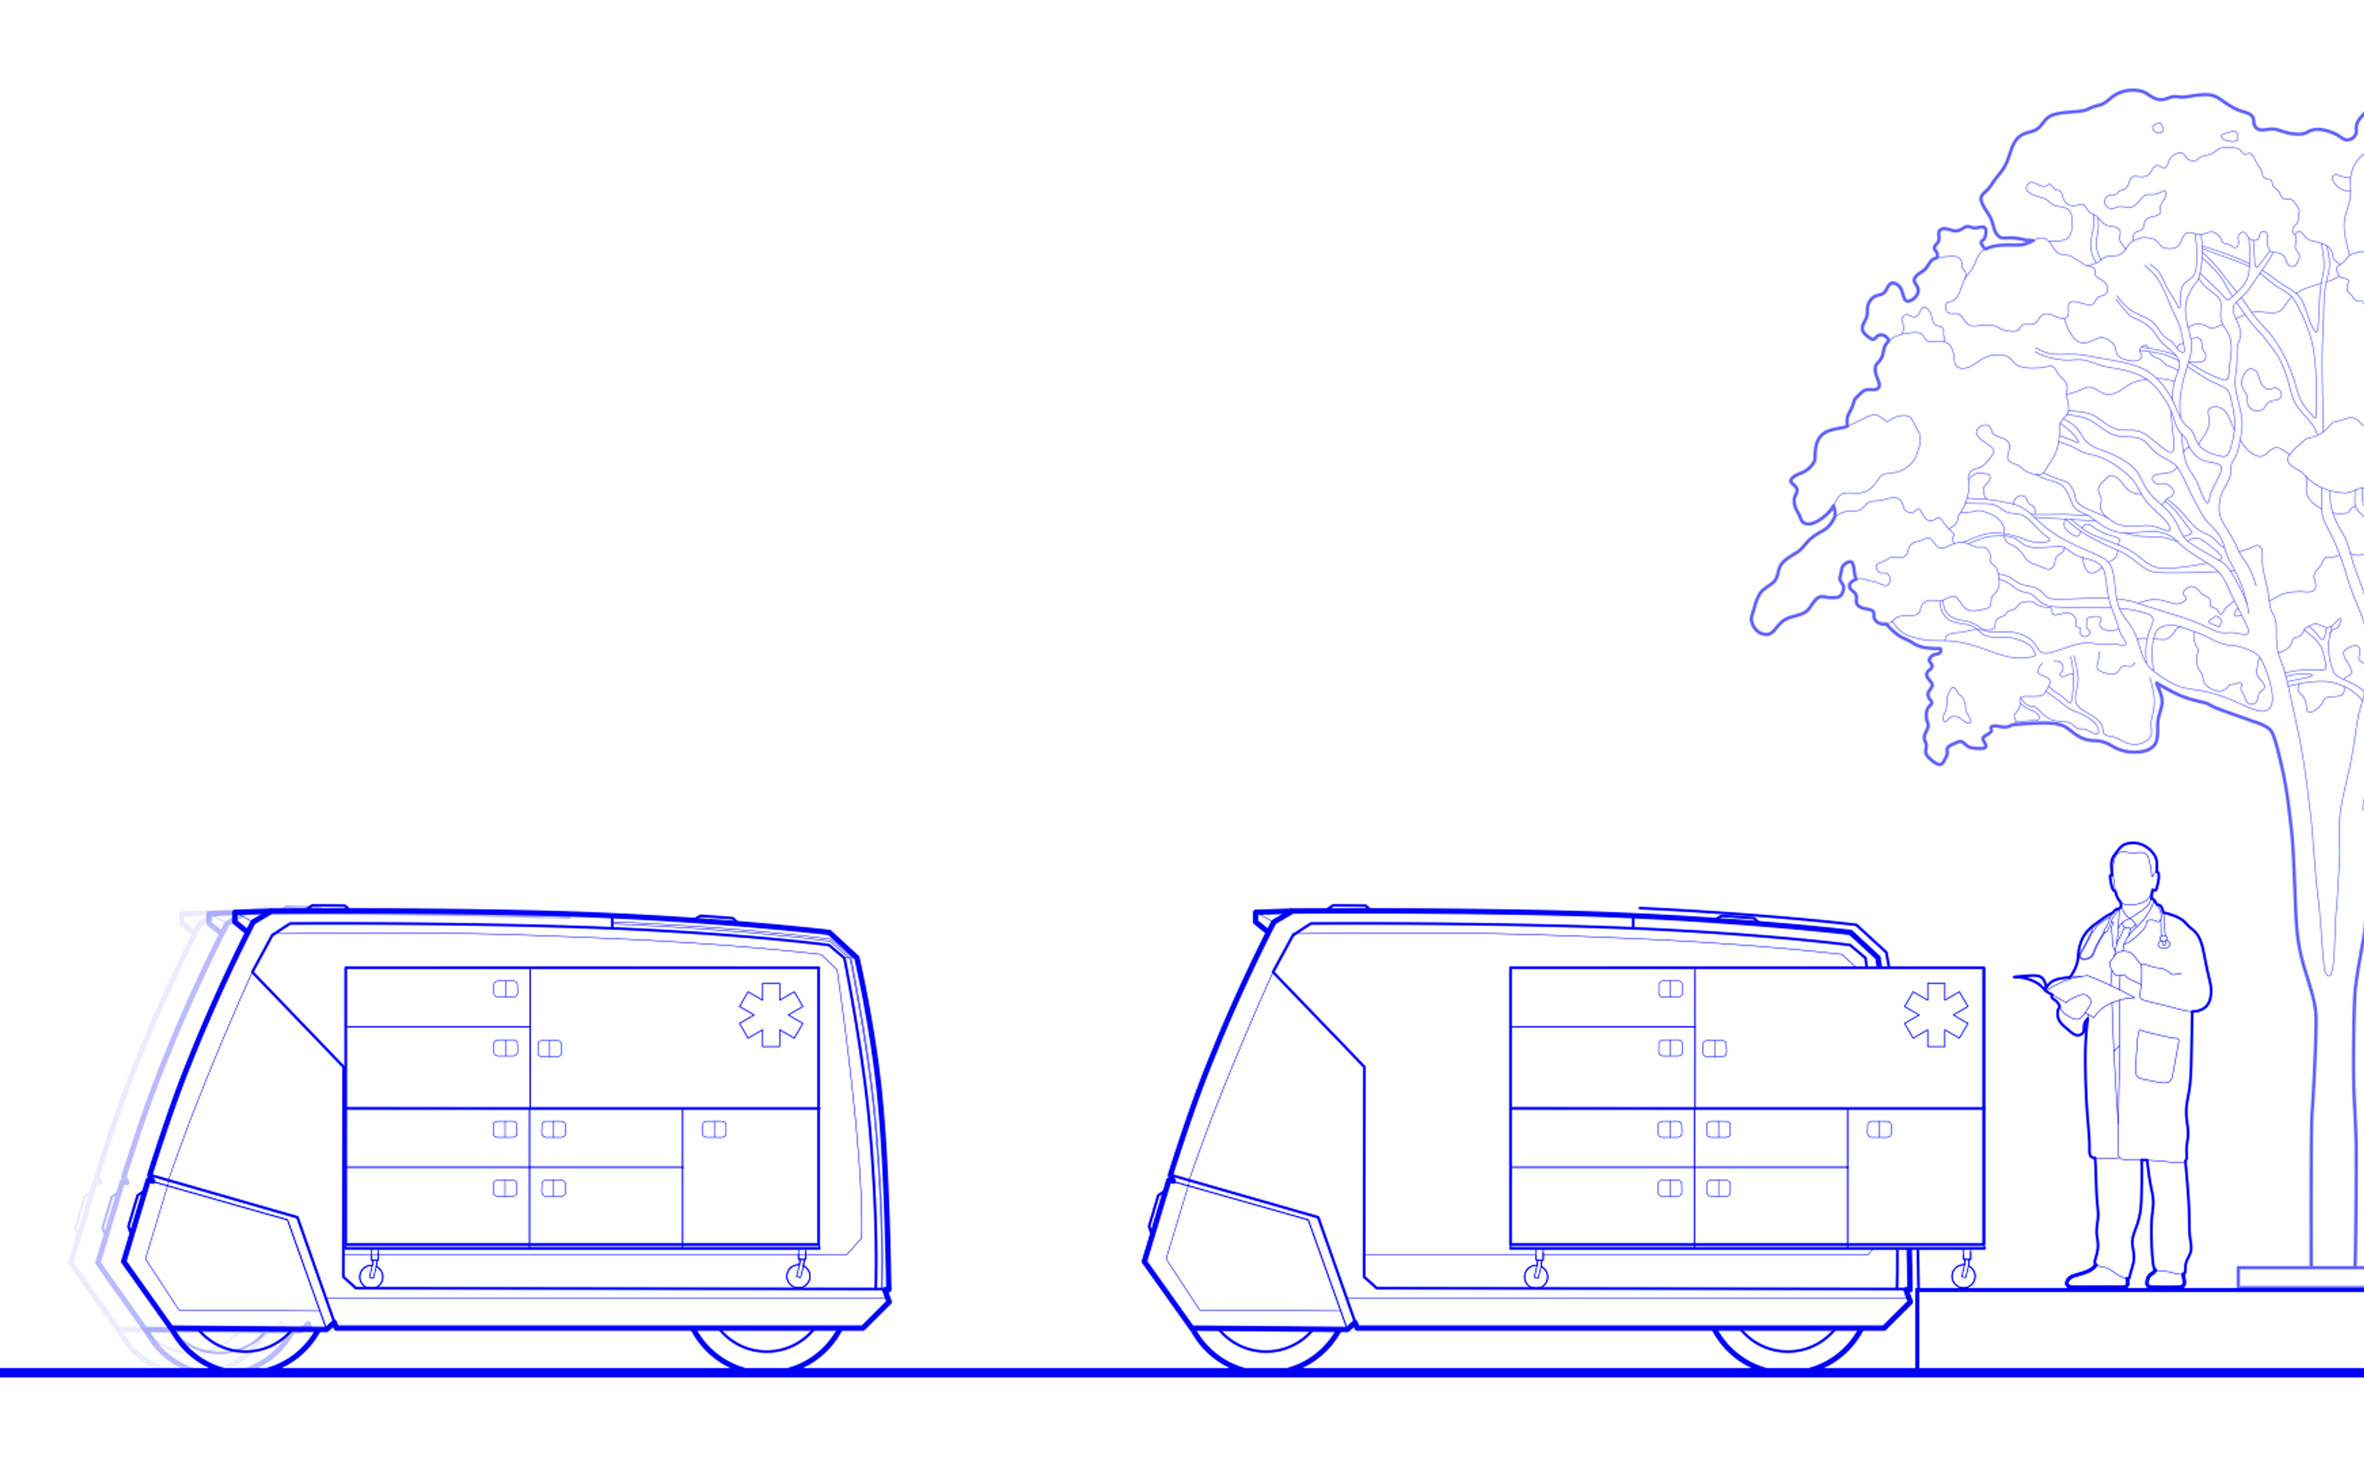 Jens Martin Skibsted designs “pandemic proof” non-emergency medical transport for cities